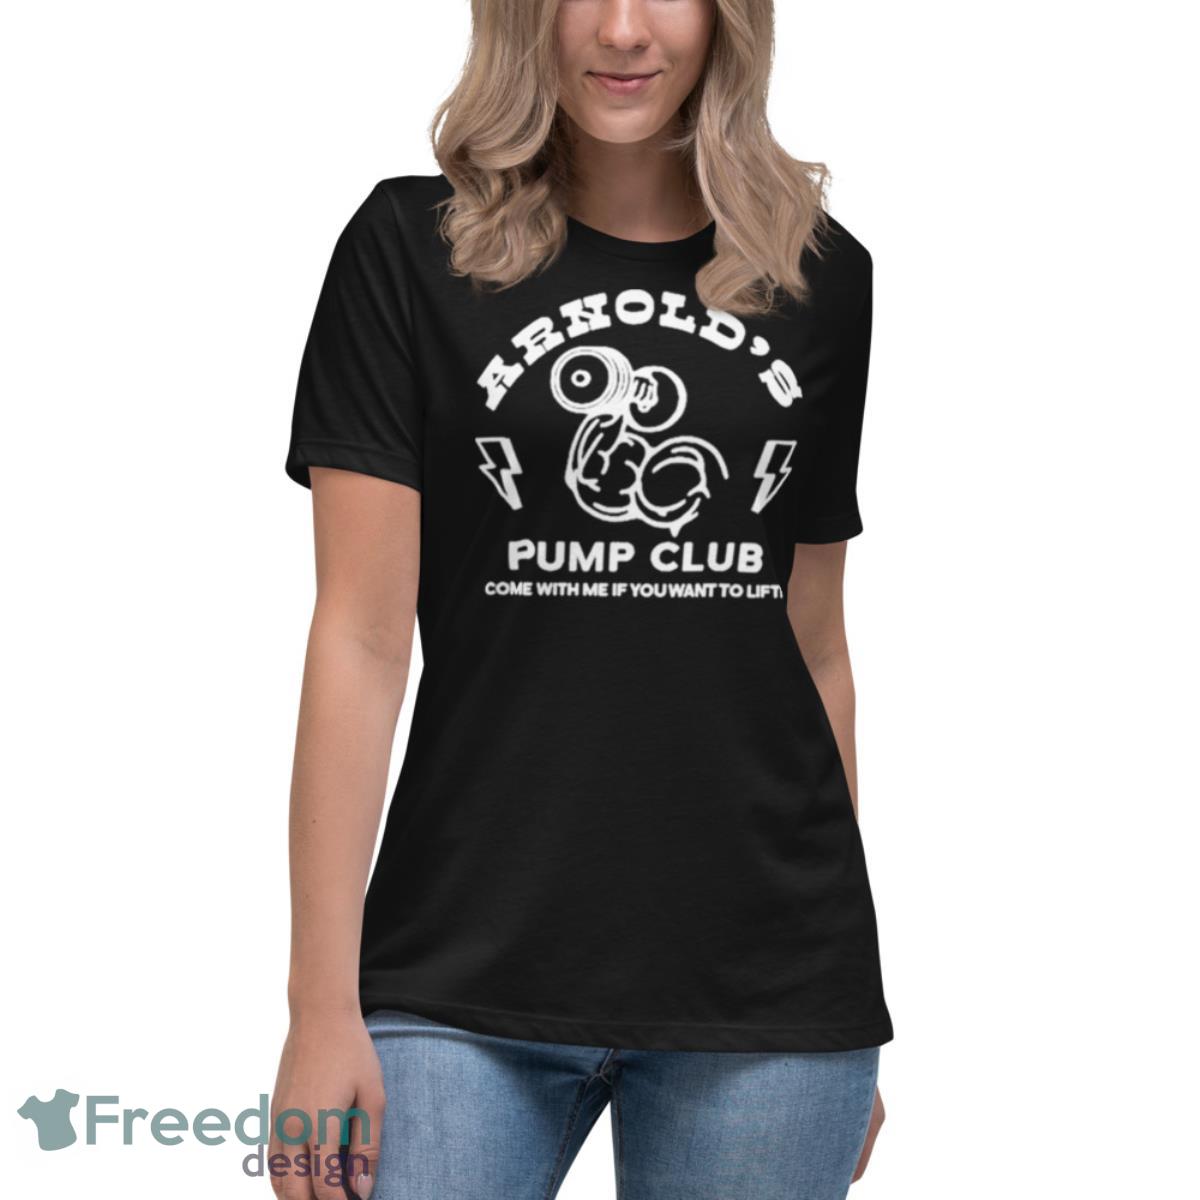 Arnold’s Pump Club Come With Me If You Want To Lift Shirt